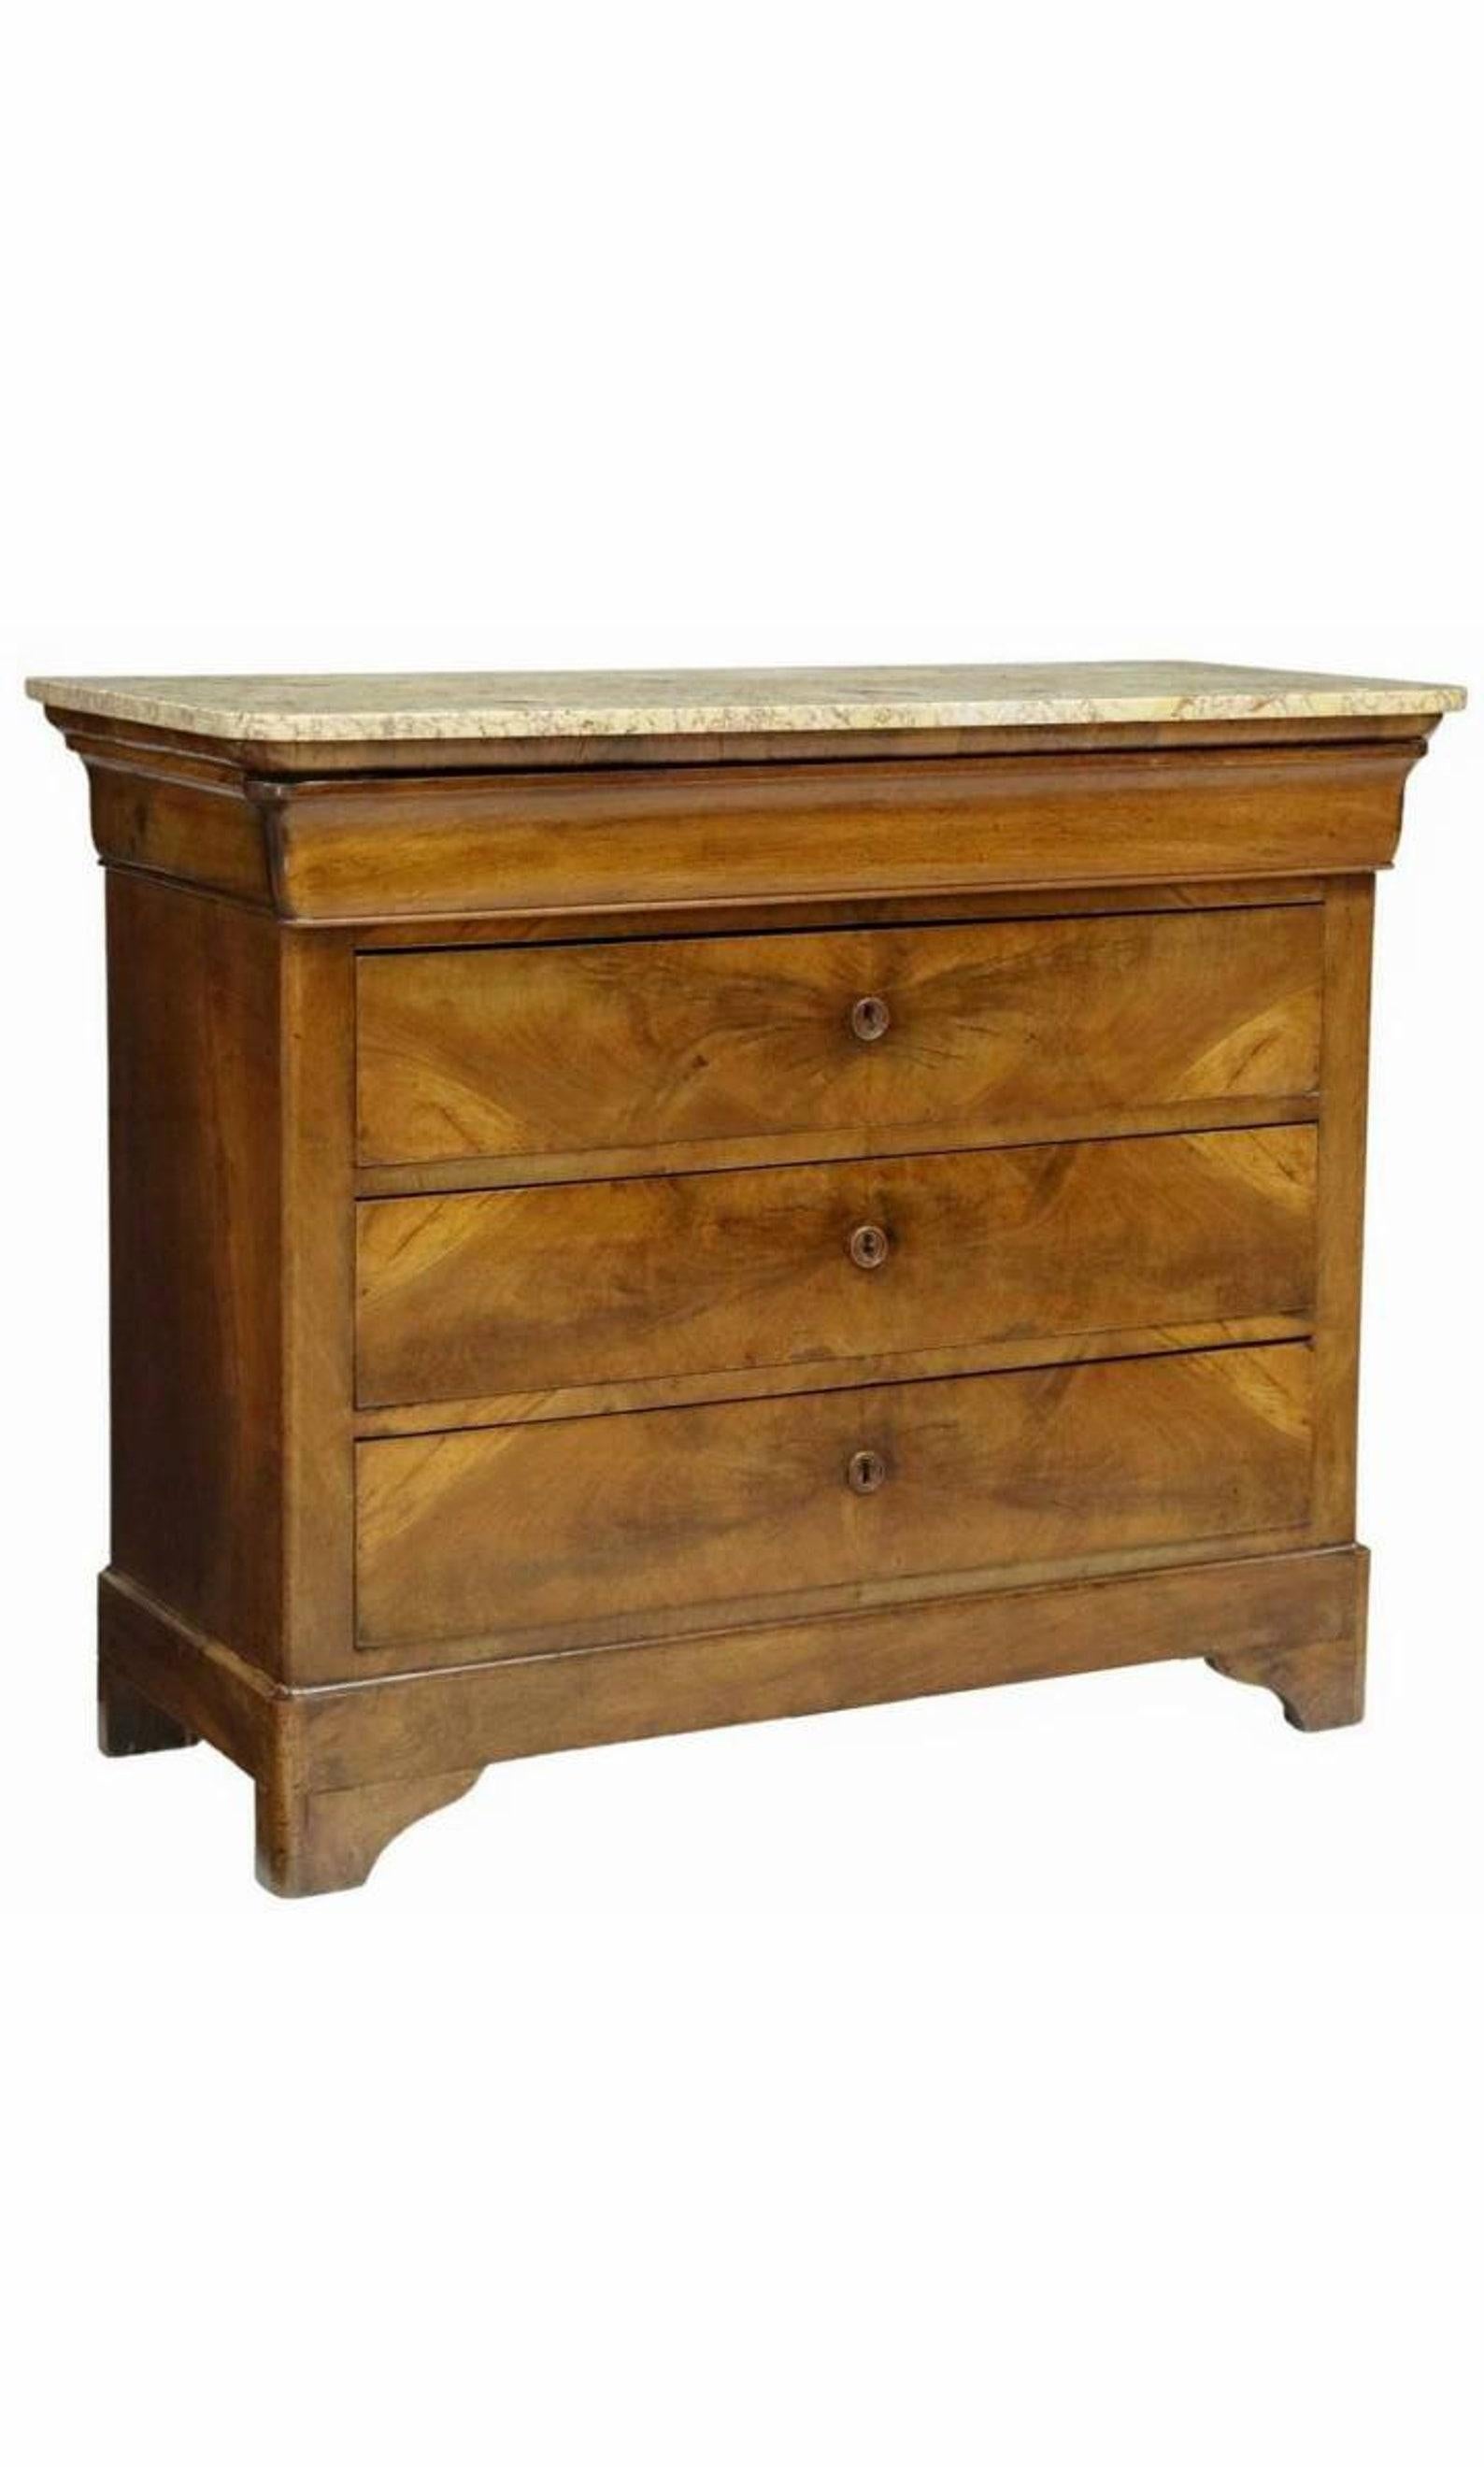 A period French Louis Philippe (1830-1848) walnut chest of drawers commode.

Hand-crafted in France in the early/mid-19th century, featuring elegant richly grained book-matched burl wood veneered solid wood case, fitted with a concealed ogee